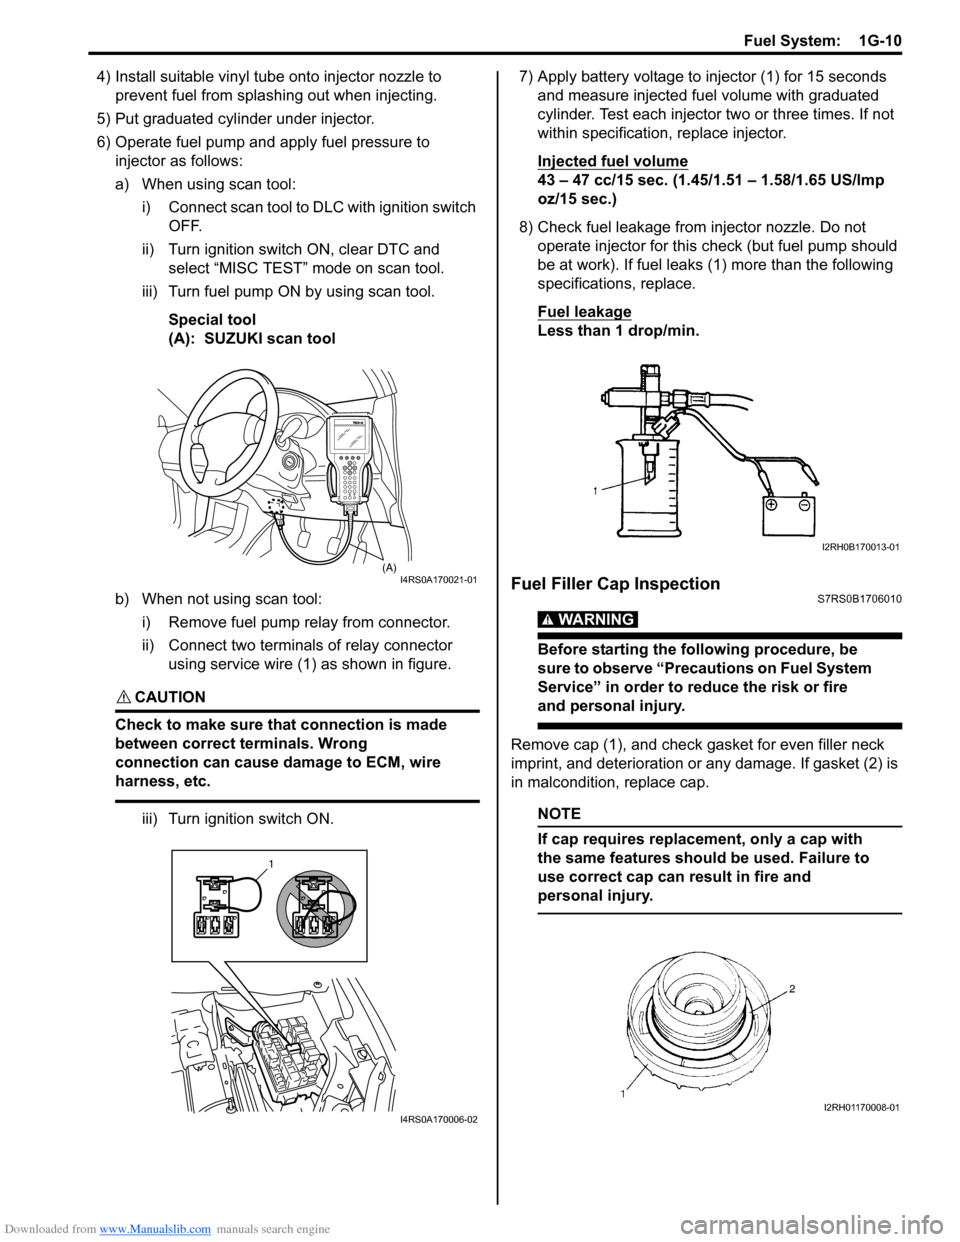 SUZUKI SWIFT 2005 2.G Service Workshop Manual Downloaded from www.Manualslib.com manuals search engine Fuel System:  1G-10
4) Install suitable vinyl tube onto injector nozzle to 
prevent fuel from splashing out when injecting.
5) Put graduated cy